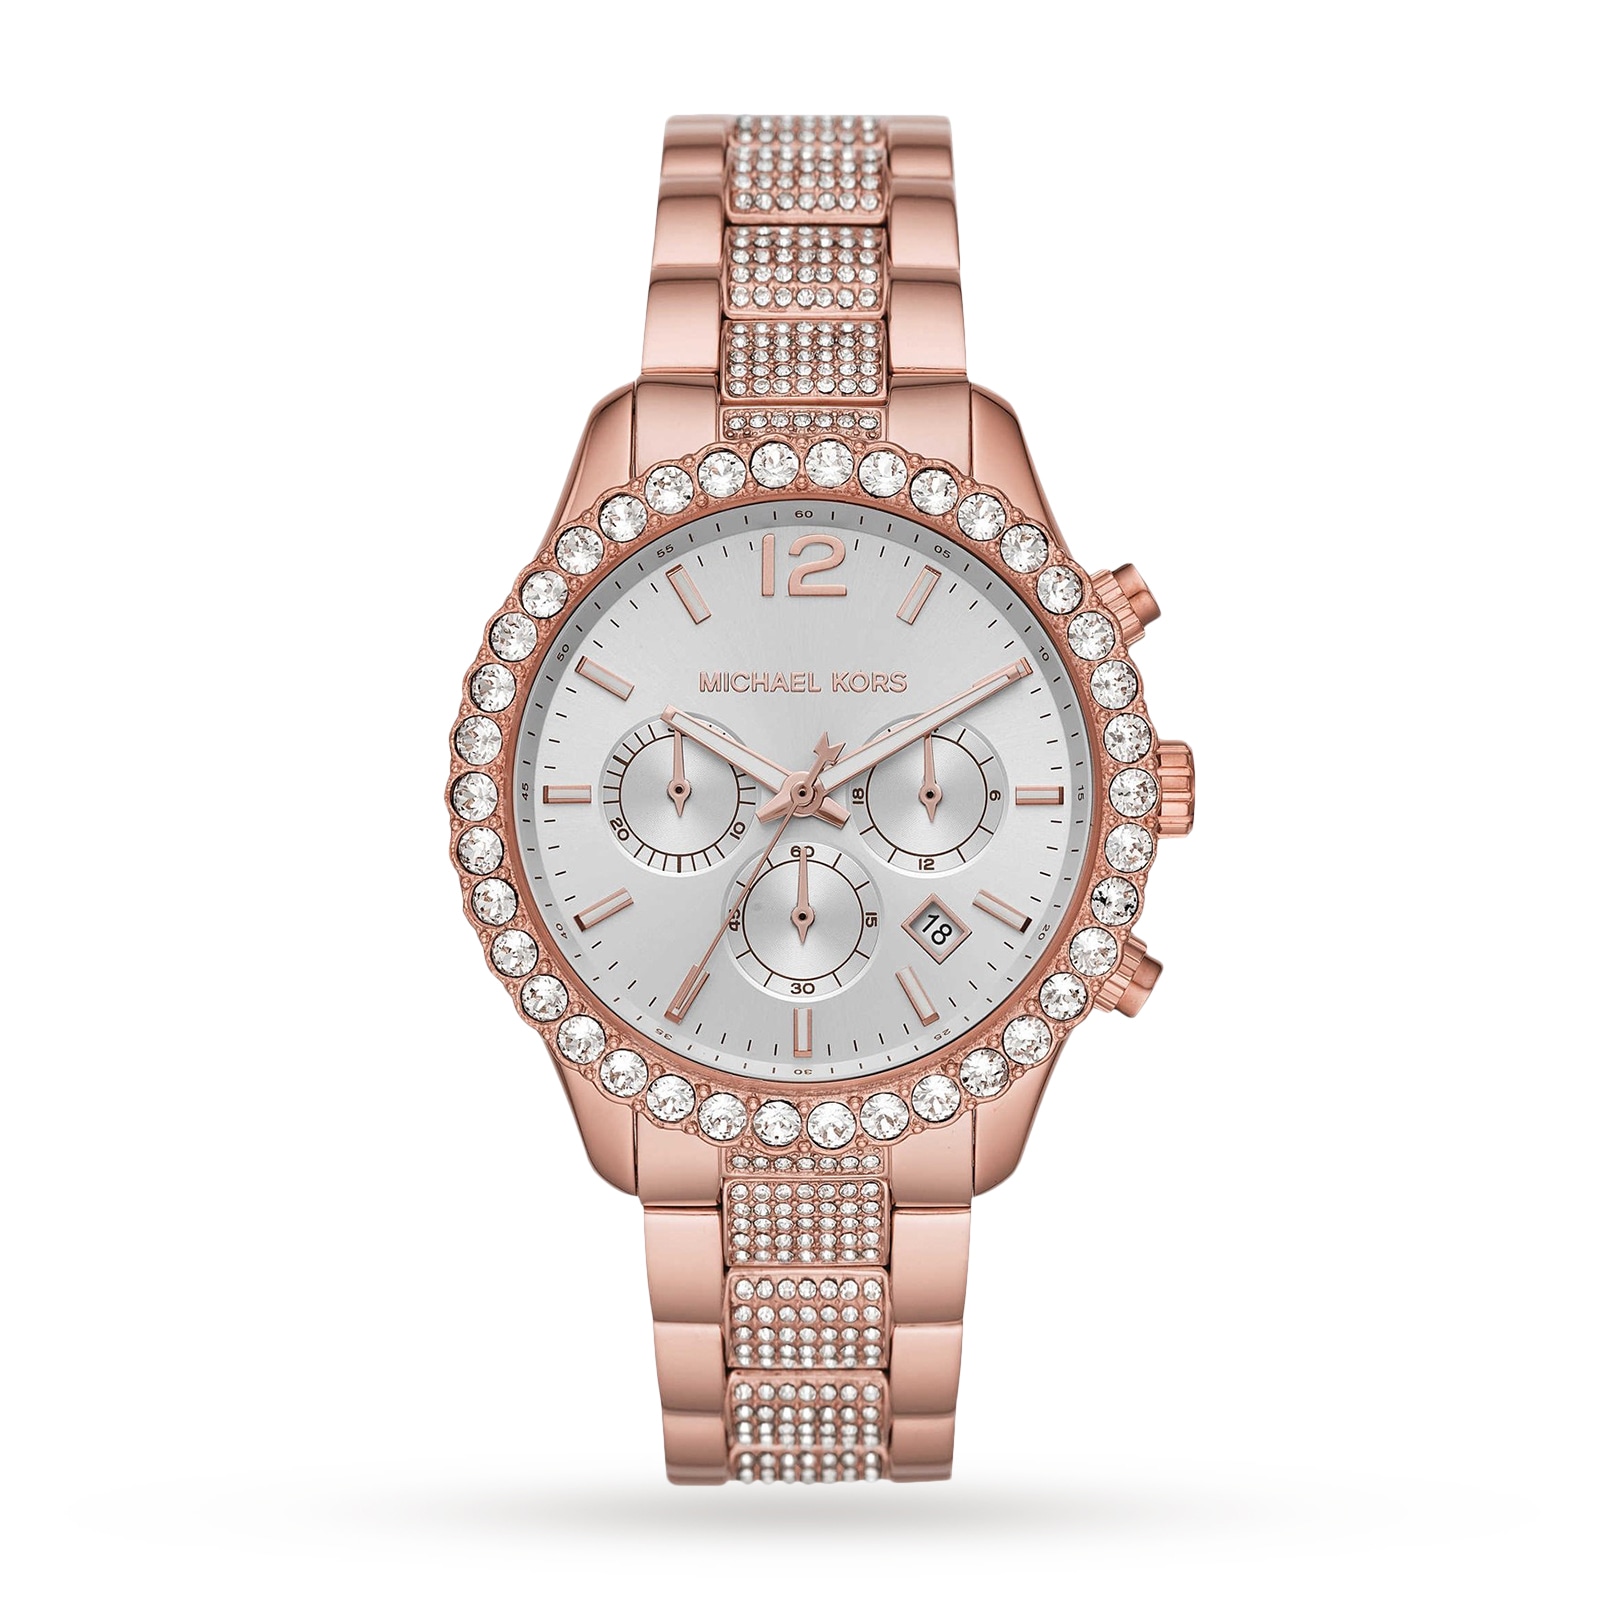 Michael Kors Watches, Michael Kors Silver & Gold Watches on Sale UK |  Goldsmiths